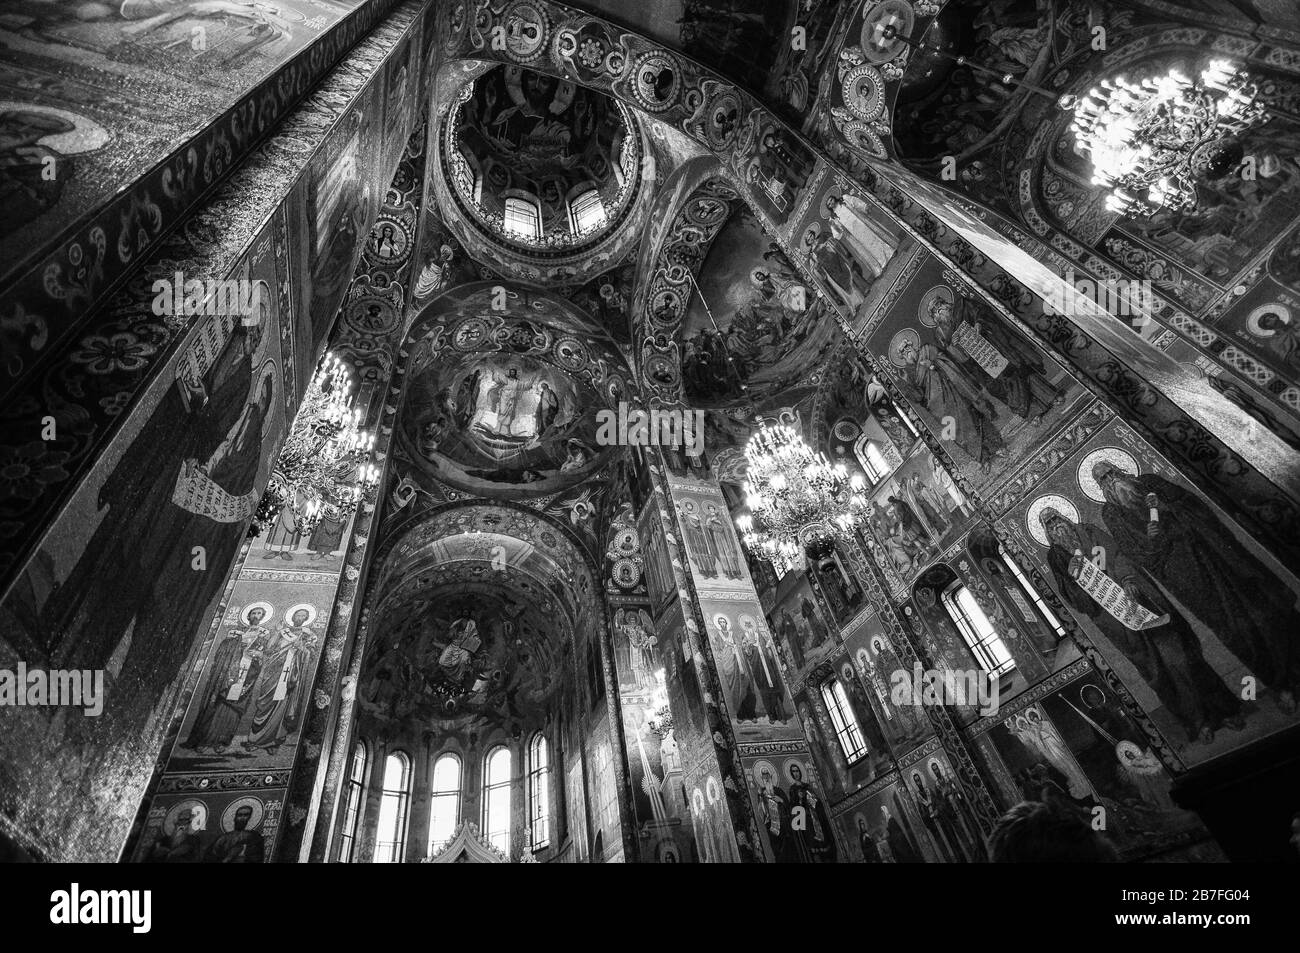 Interior of The Church of the Savior on Spilled Blood, St Petersburg, Russia Stock Photo